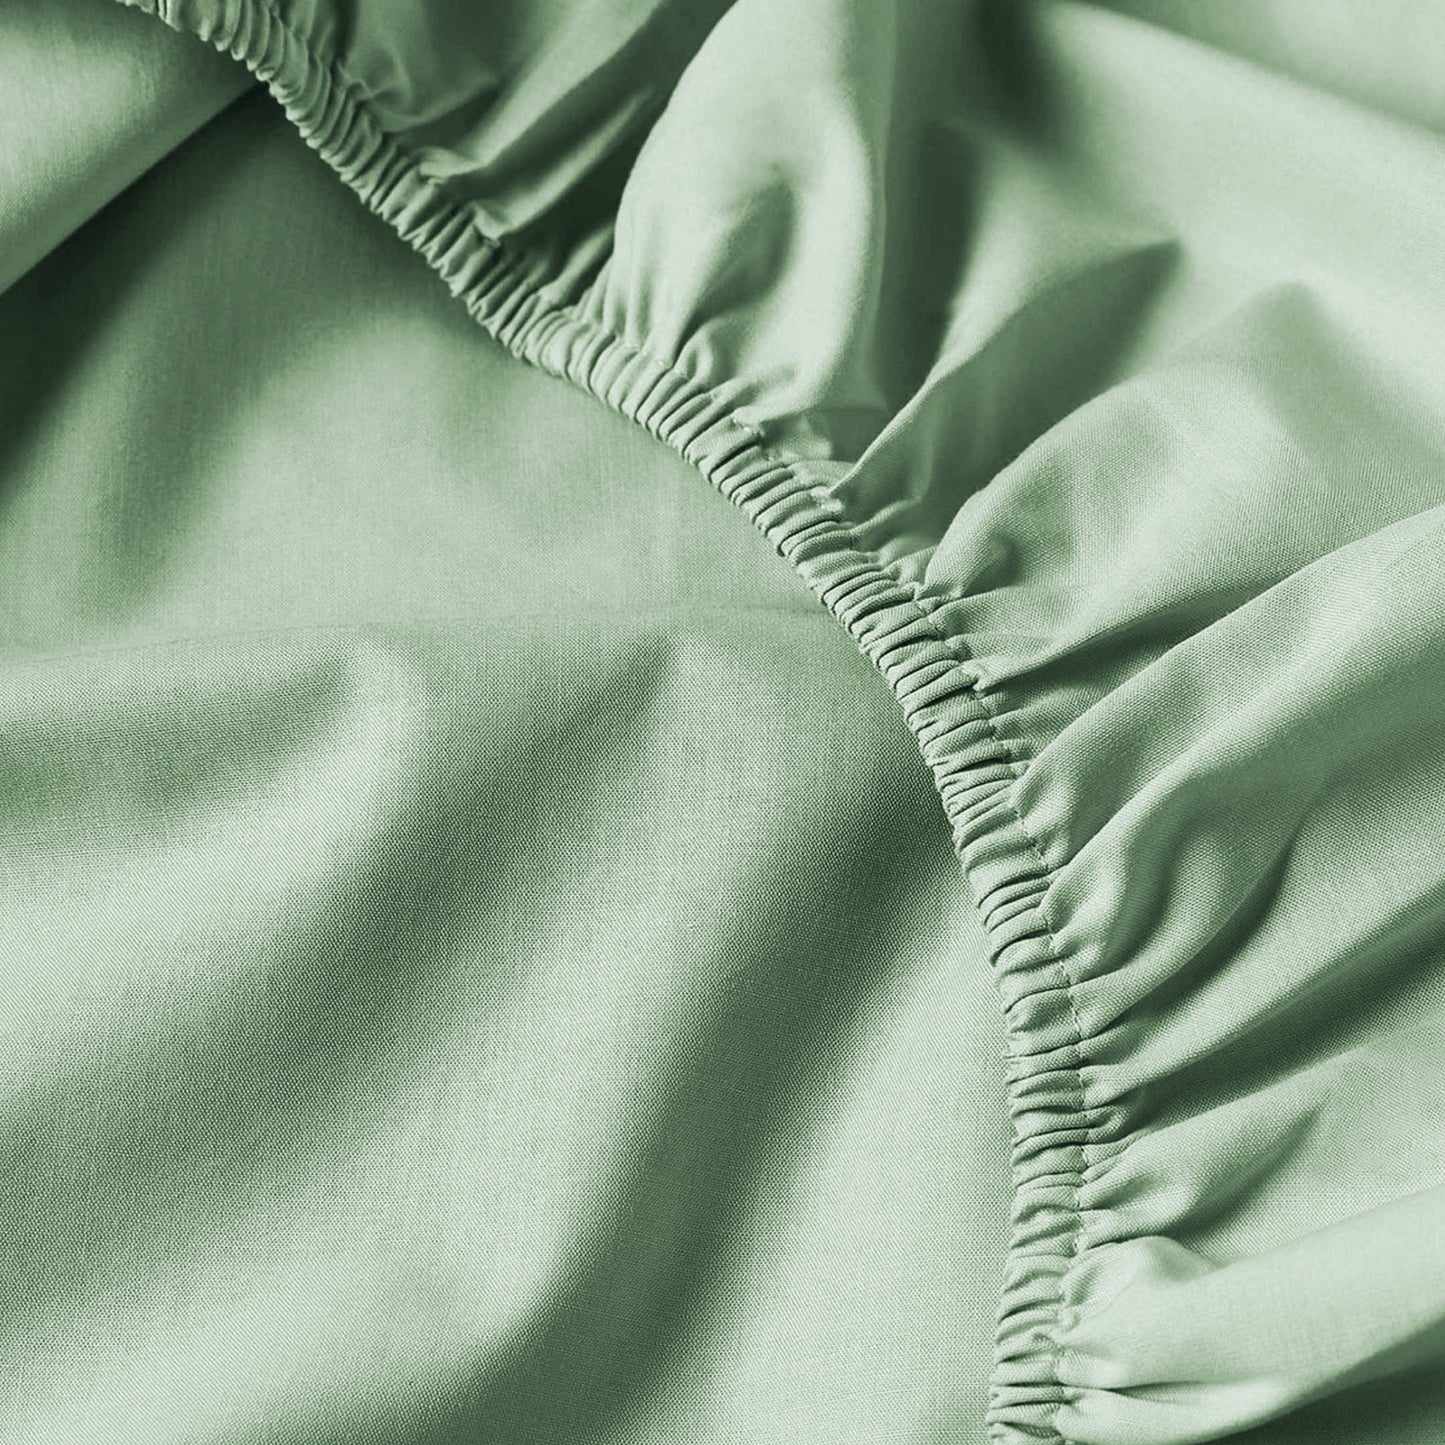 Sea green - Fitted sheet - 3 PCS king size